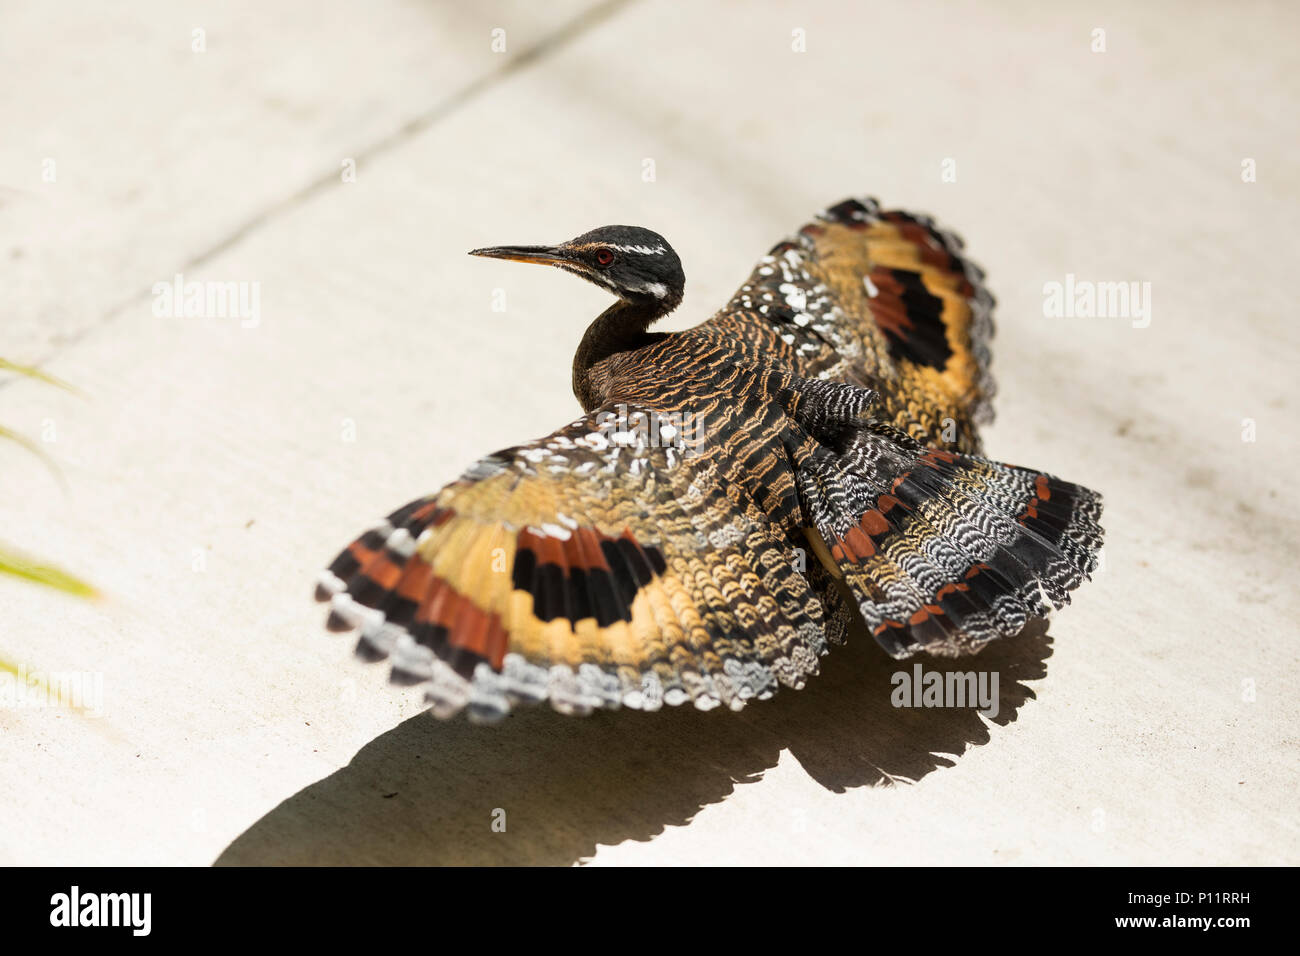 A sunbittern (Eurypyga helias) spreads its wings in the sun to show its two large eye spots, which it does during courtship or when threatened. Stock Photo